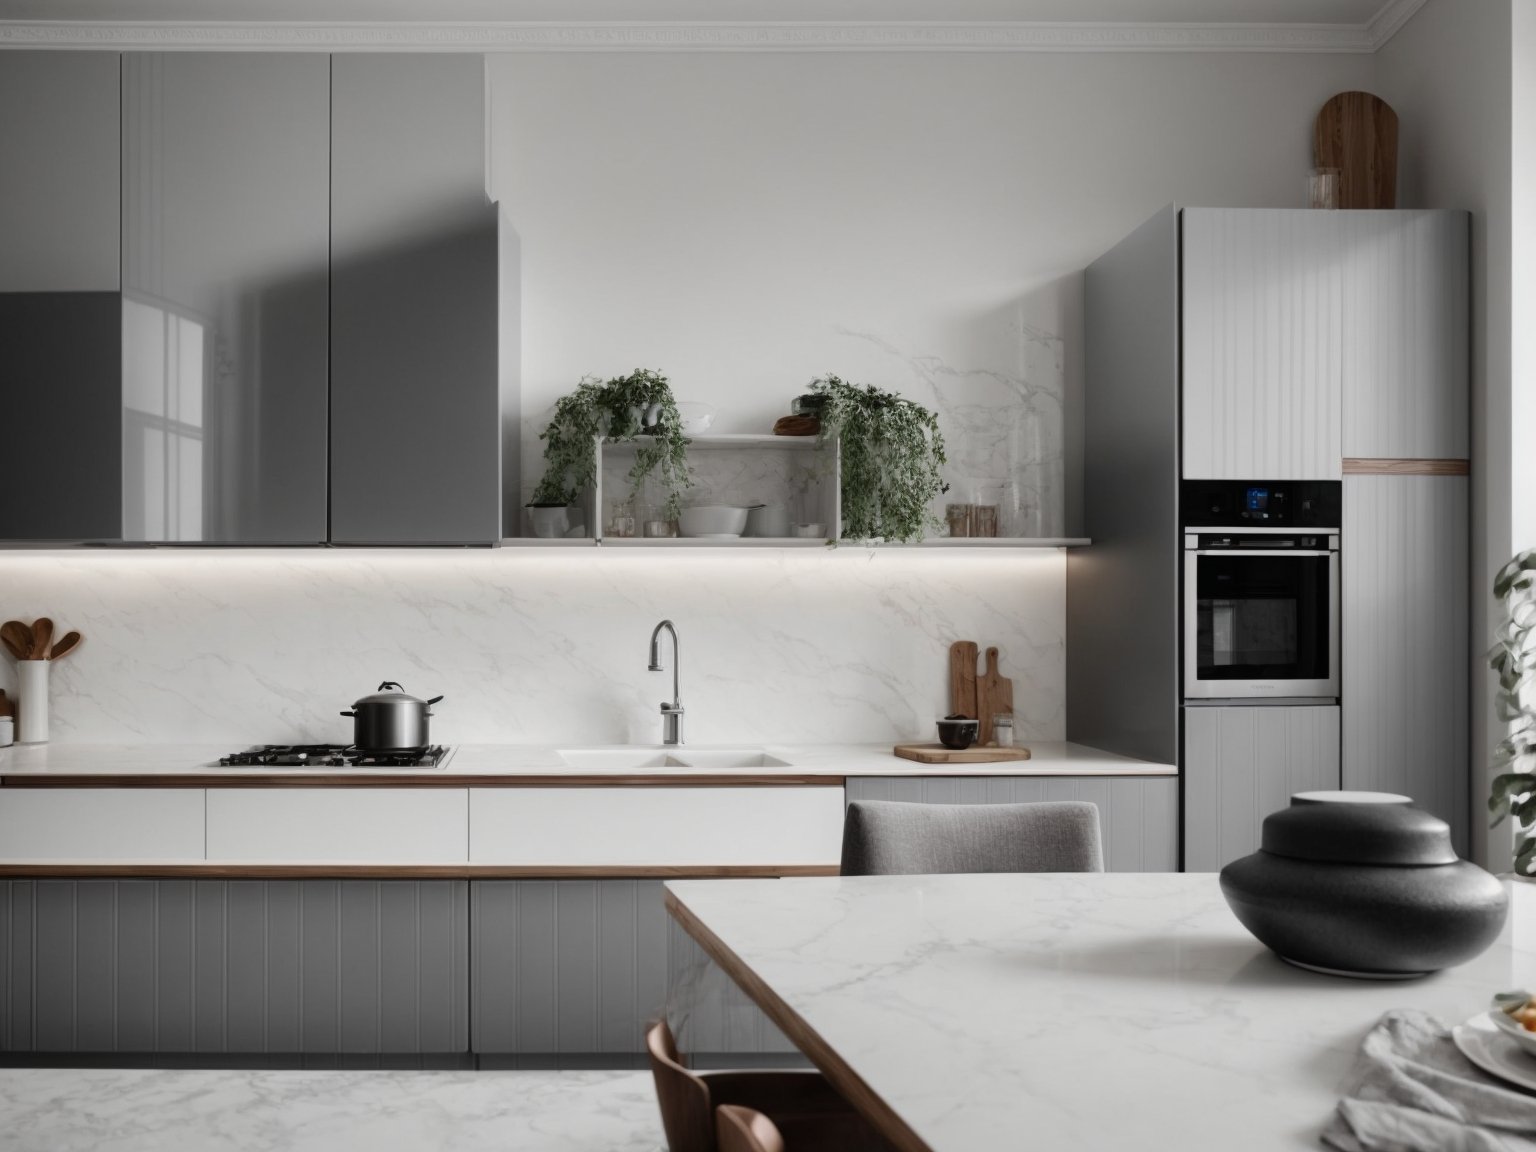 A modern kitchen with two-tone grey and white cabinets, creating a sleek and stylish look.